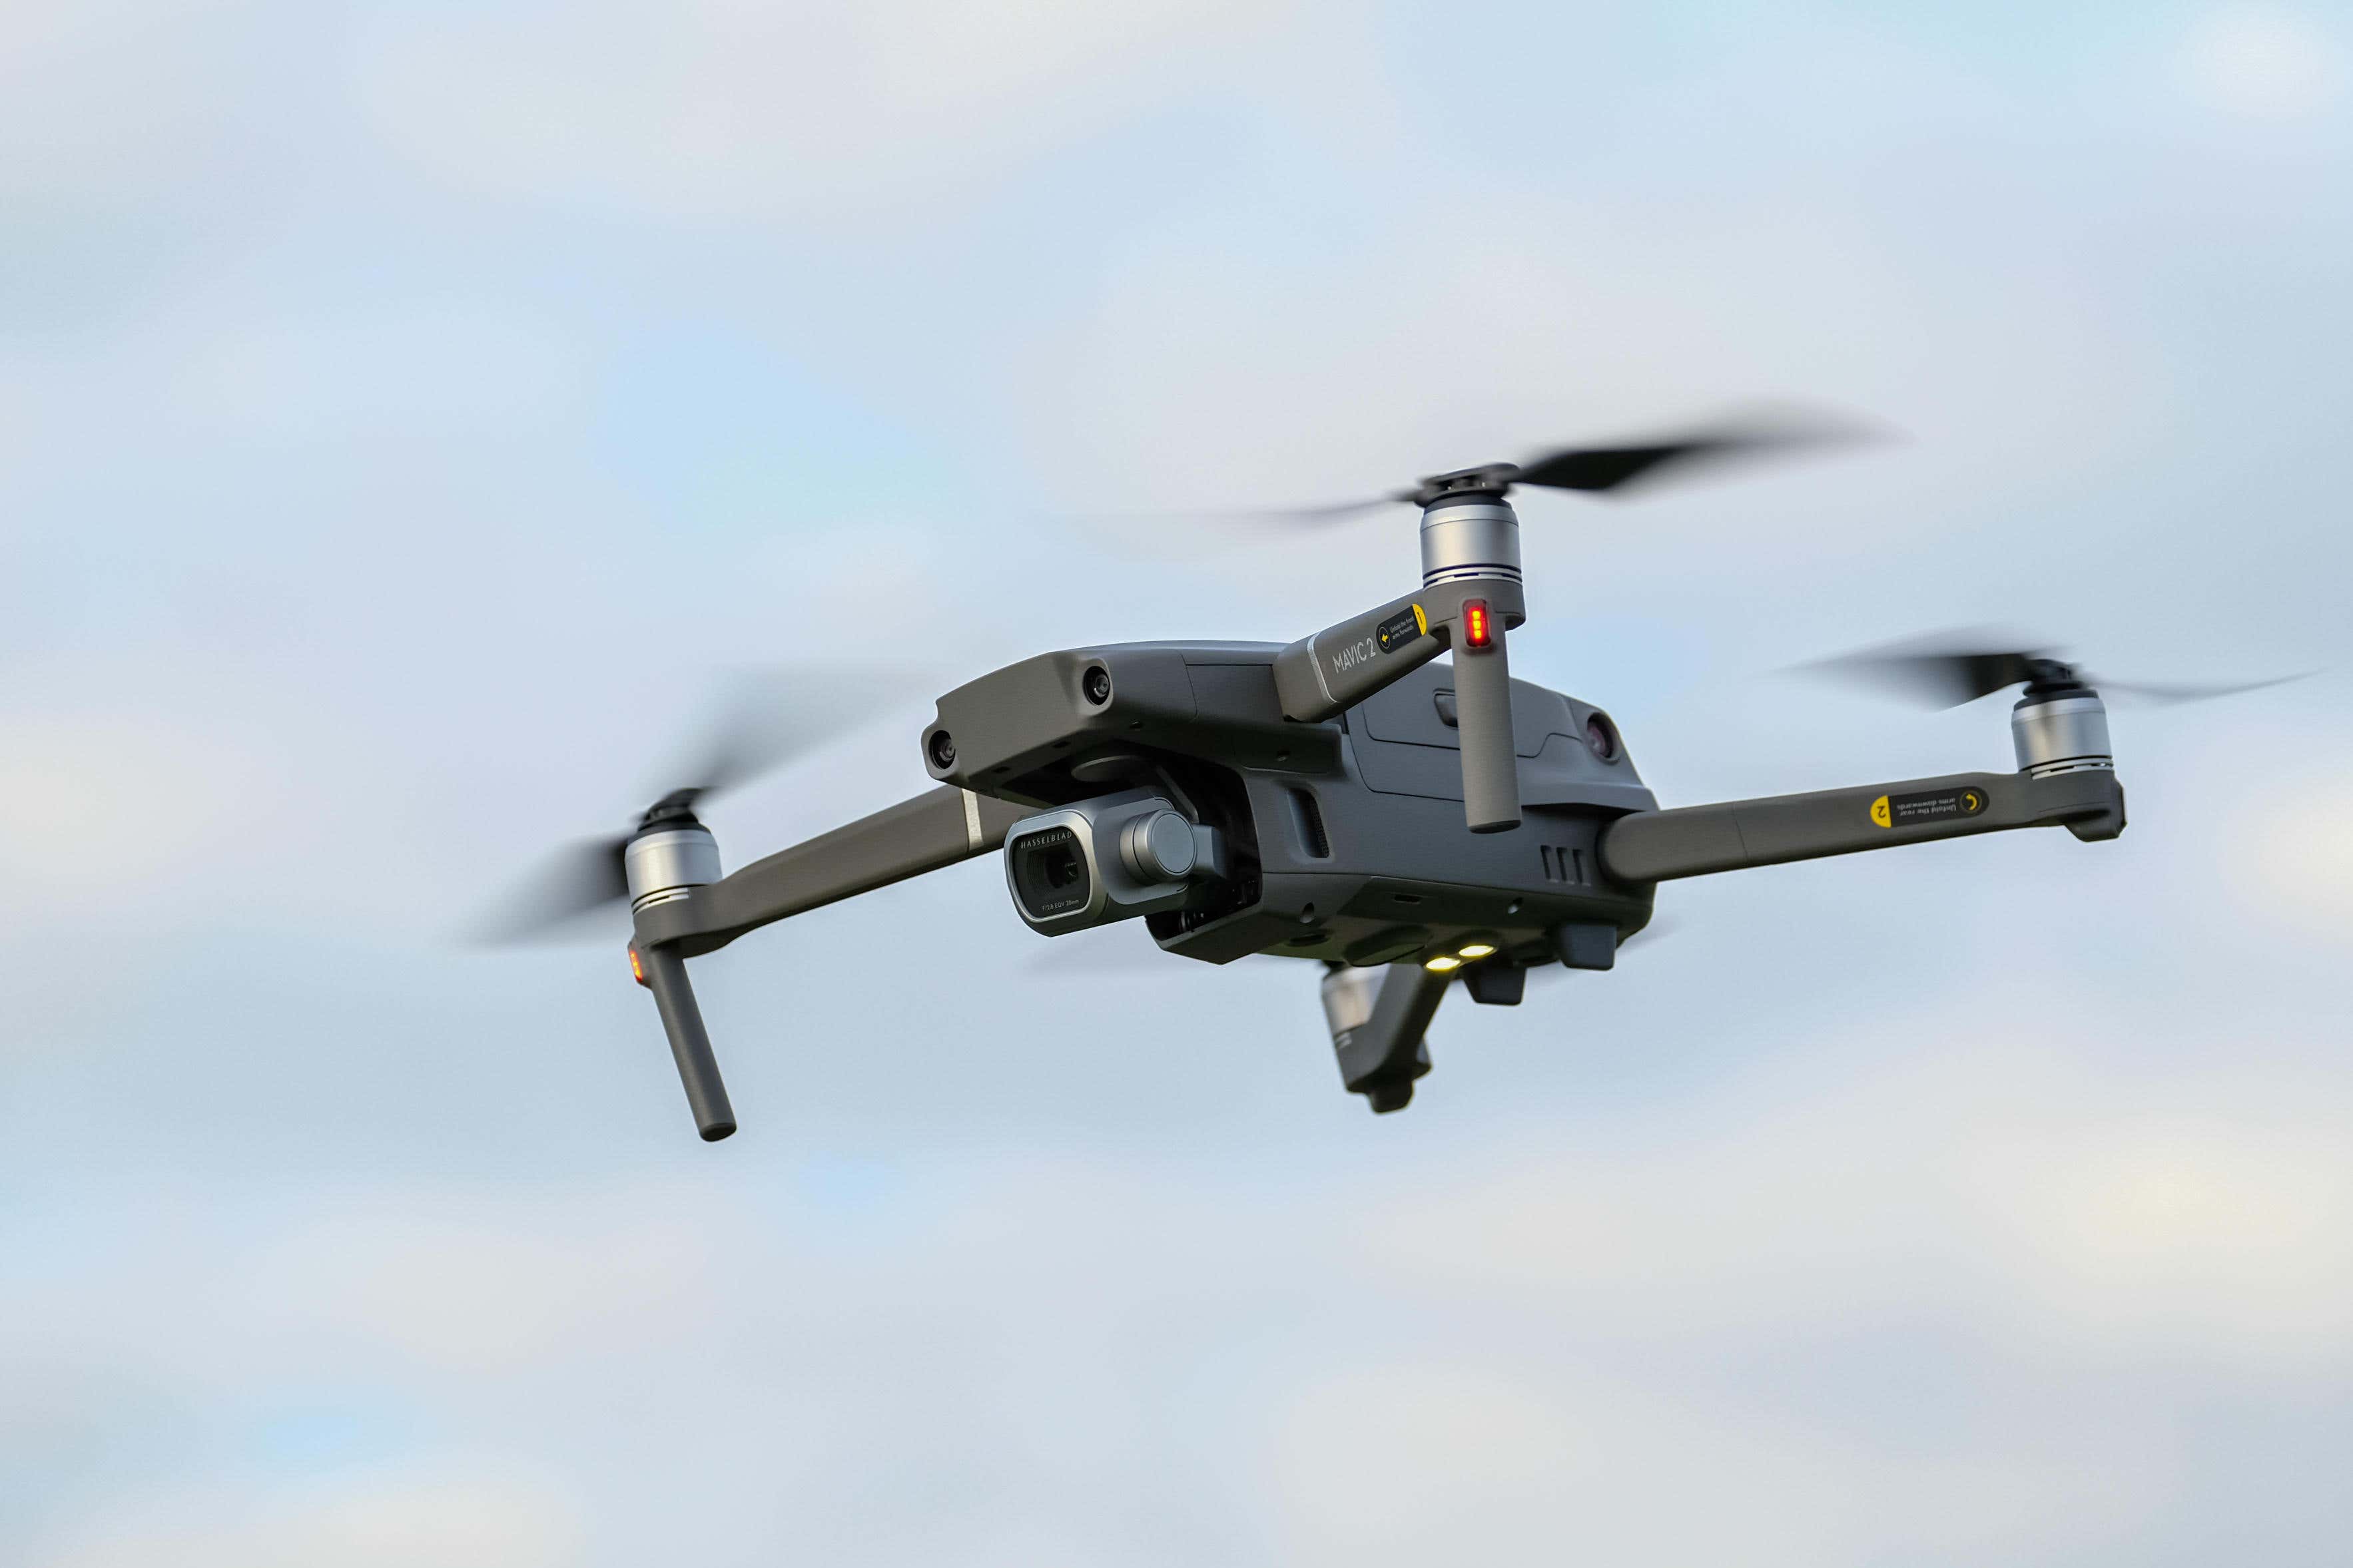 A consultation has been launched to alter rules around drones (Alamy/PA)